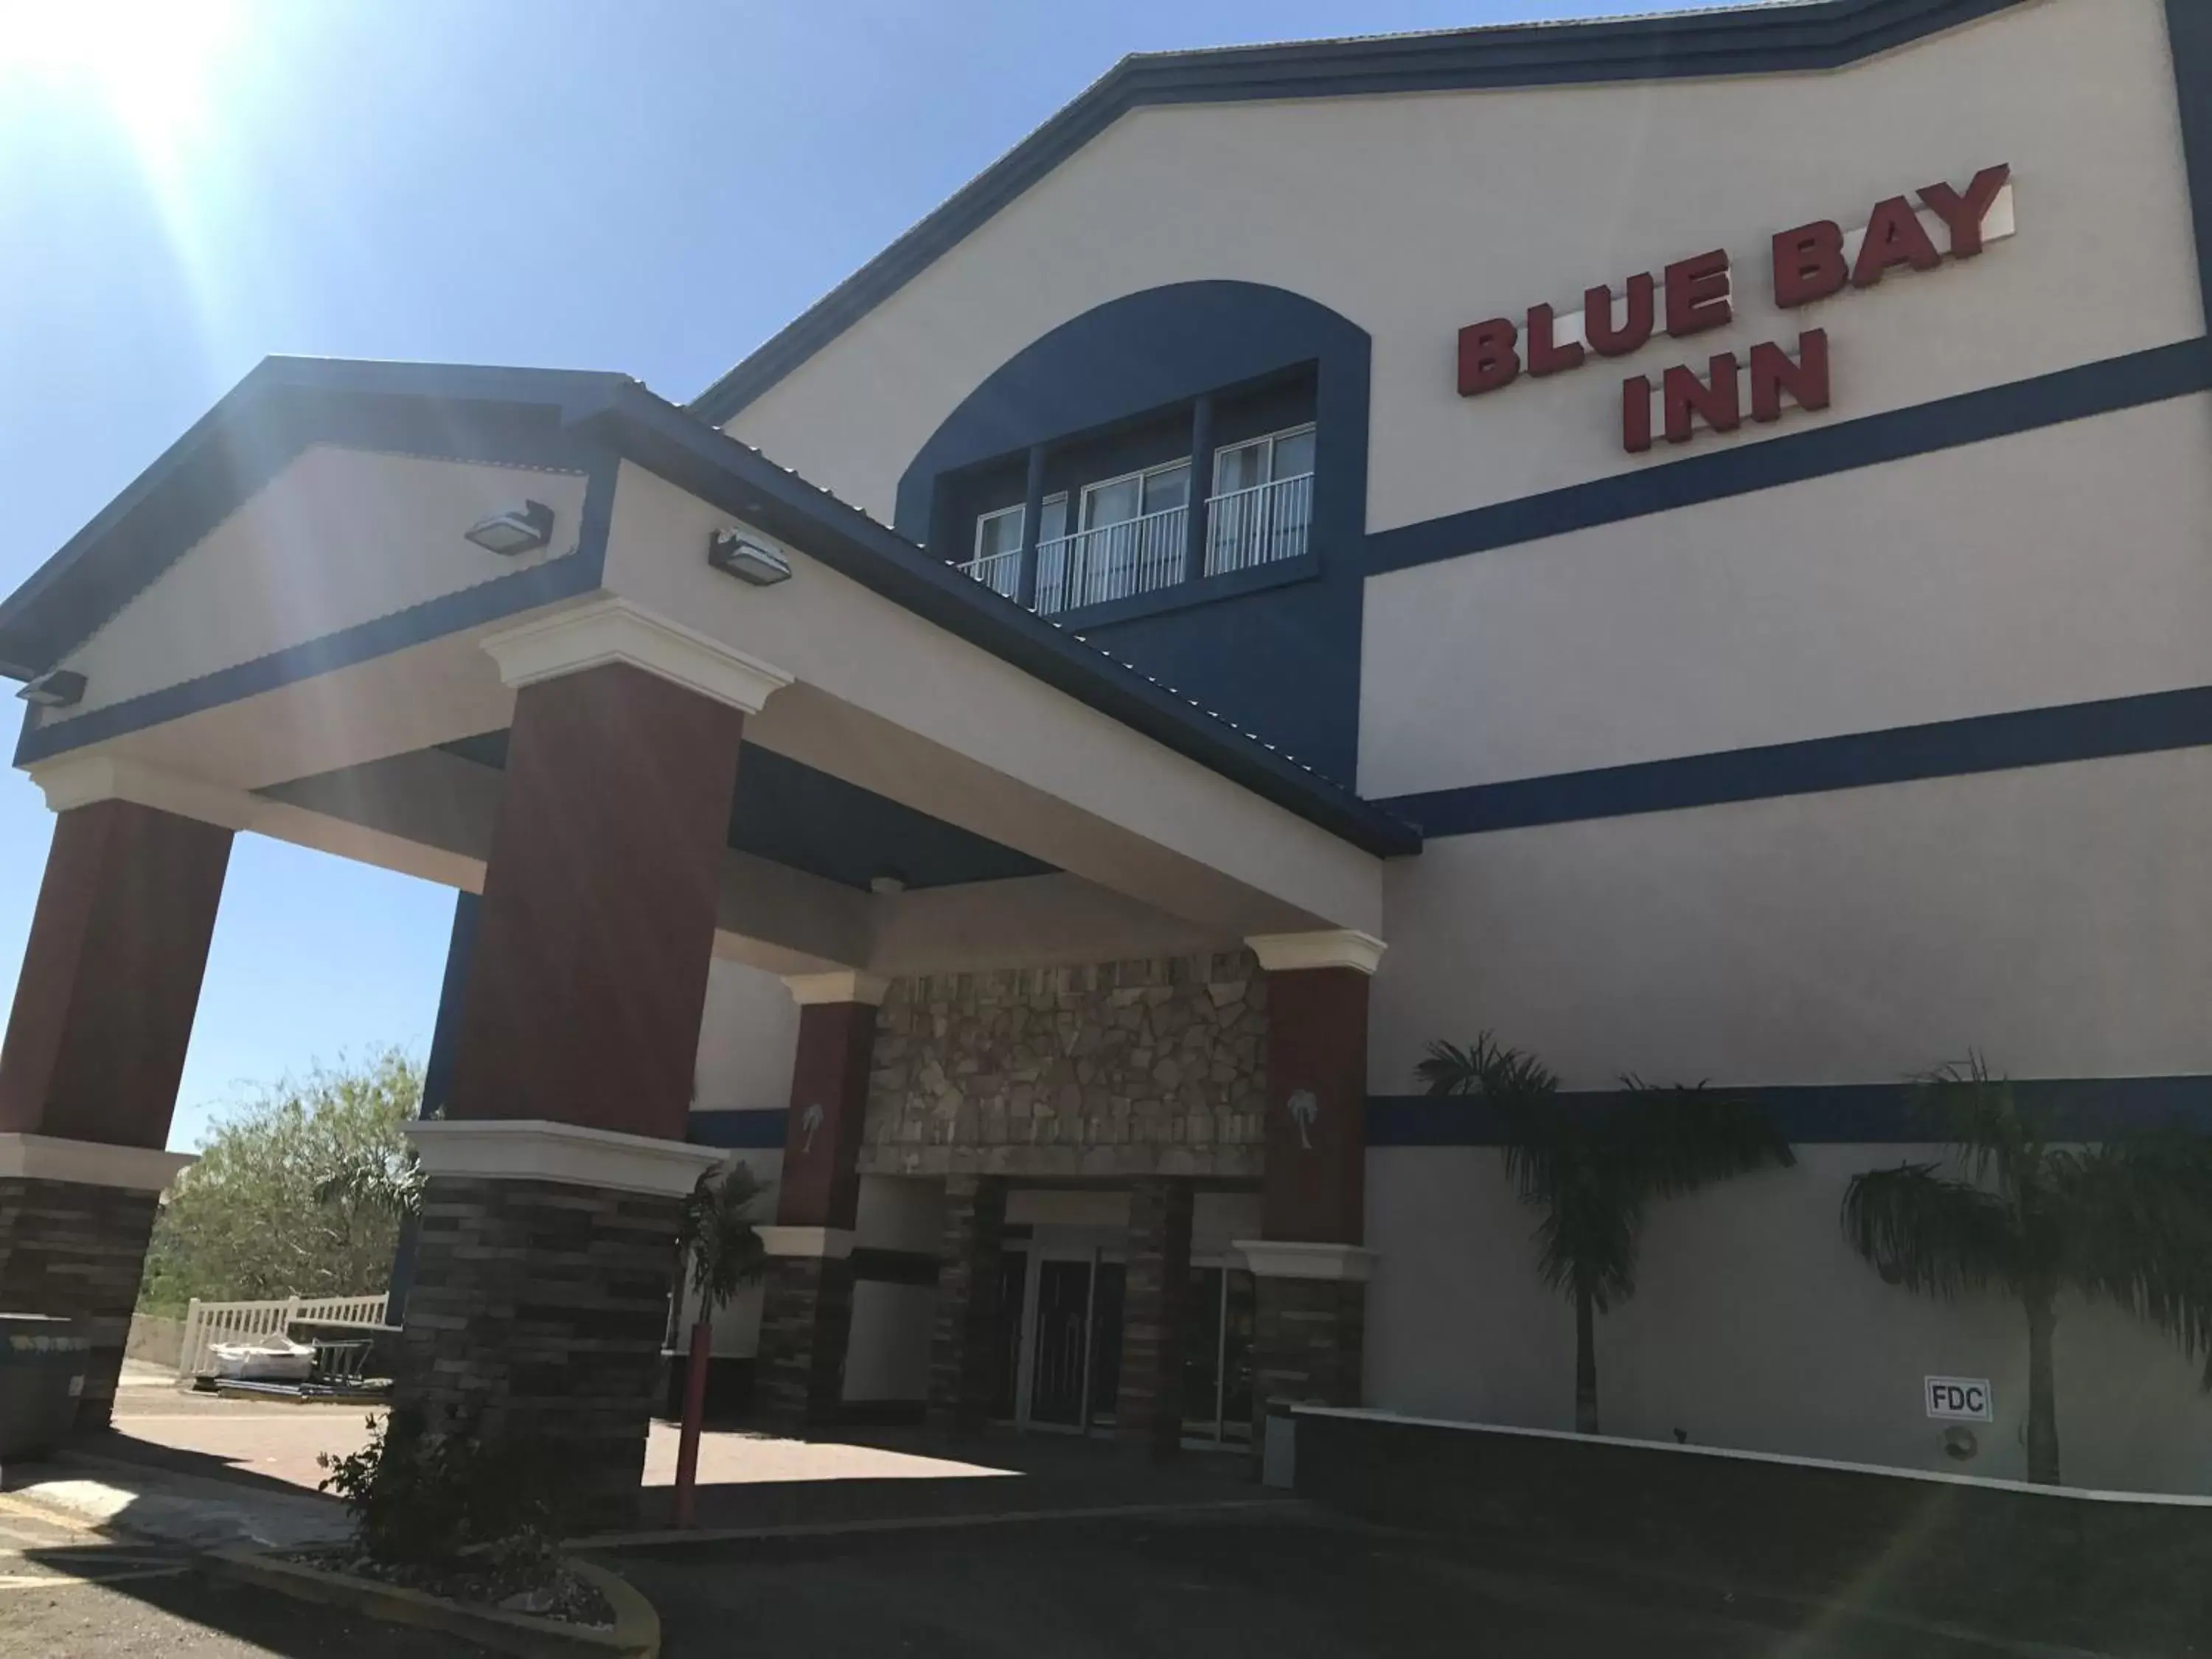 Property Building in Blue Bay Inn and Suites